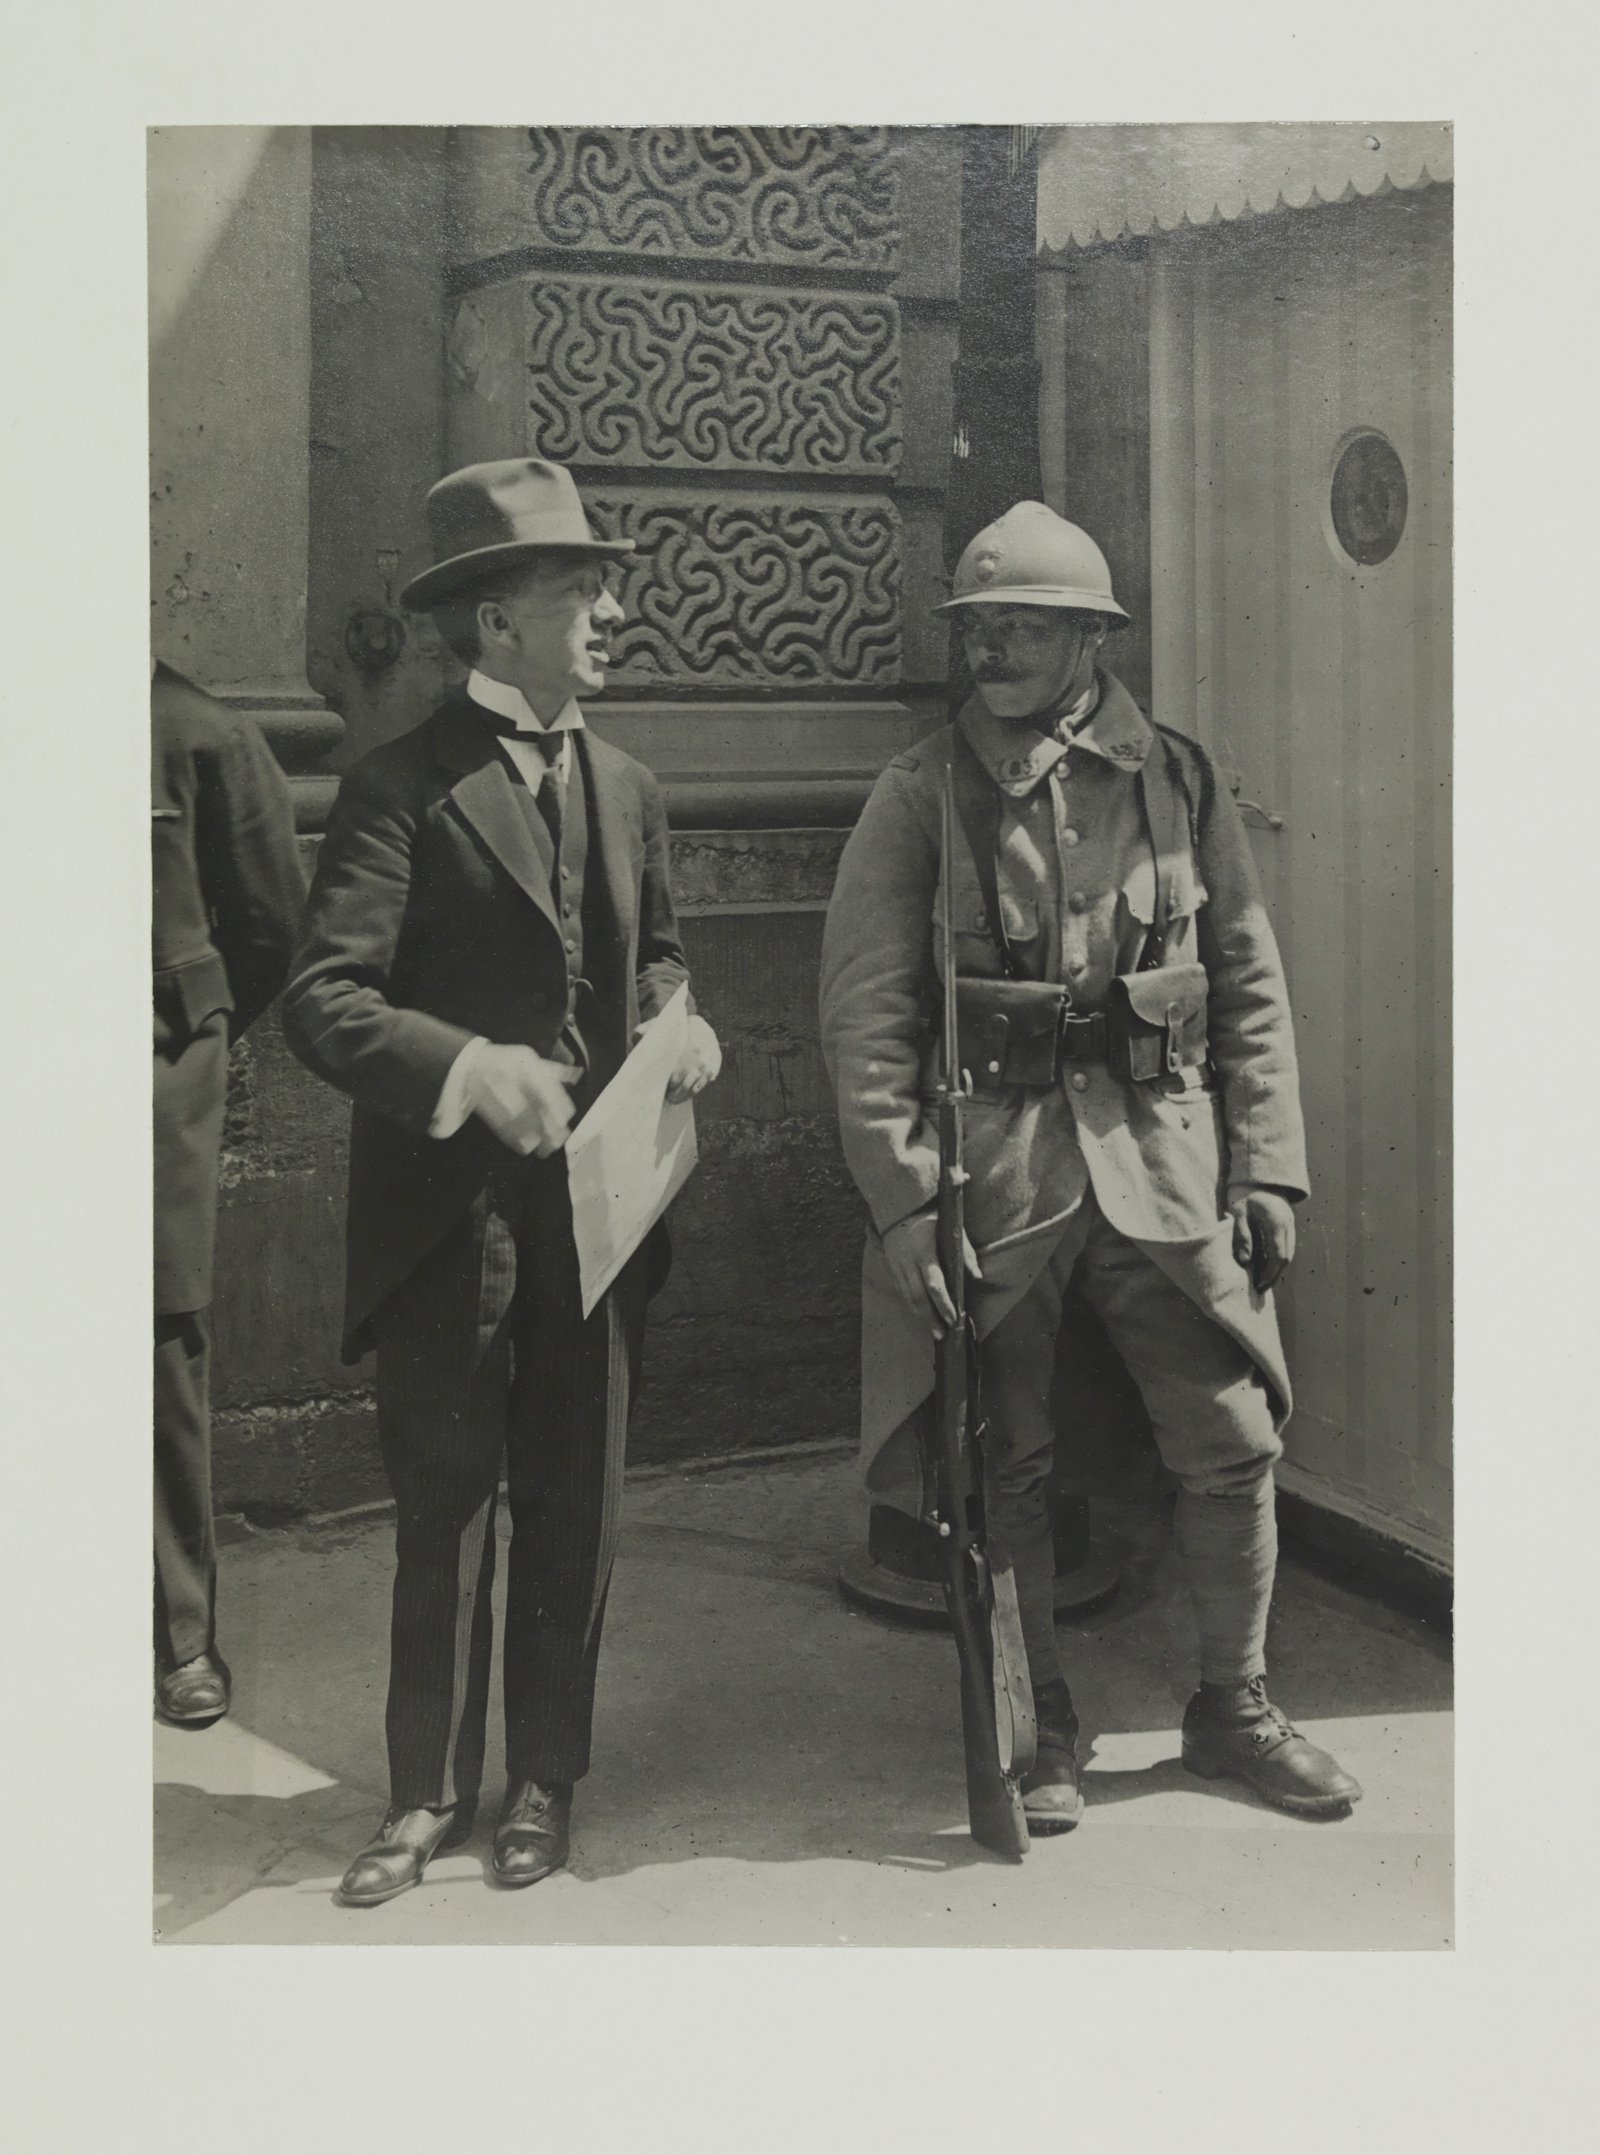 Image - Sean T O'Kelly outside the Paris peace talks, 1919 (Credit: HE-EW-320_v2 © National Museum of Ireland)